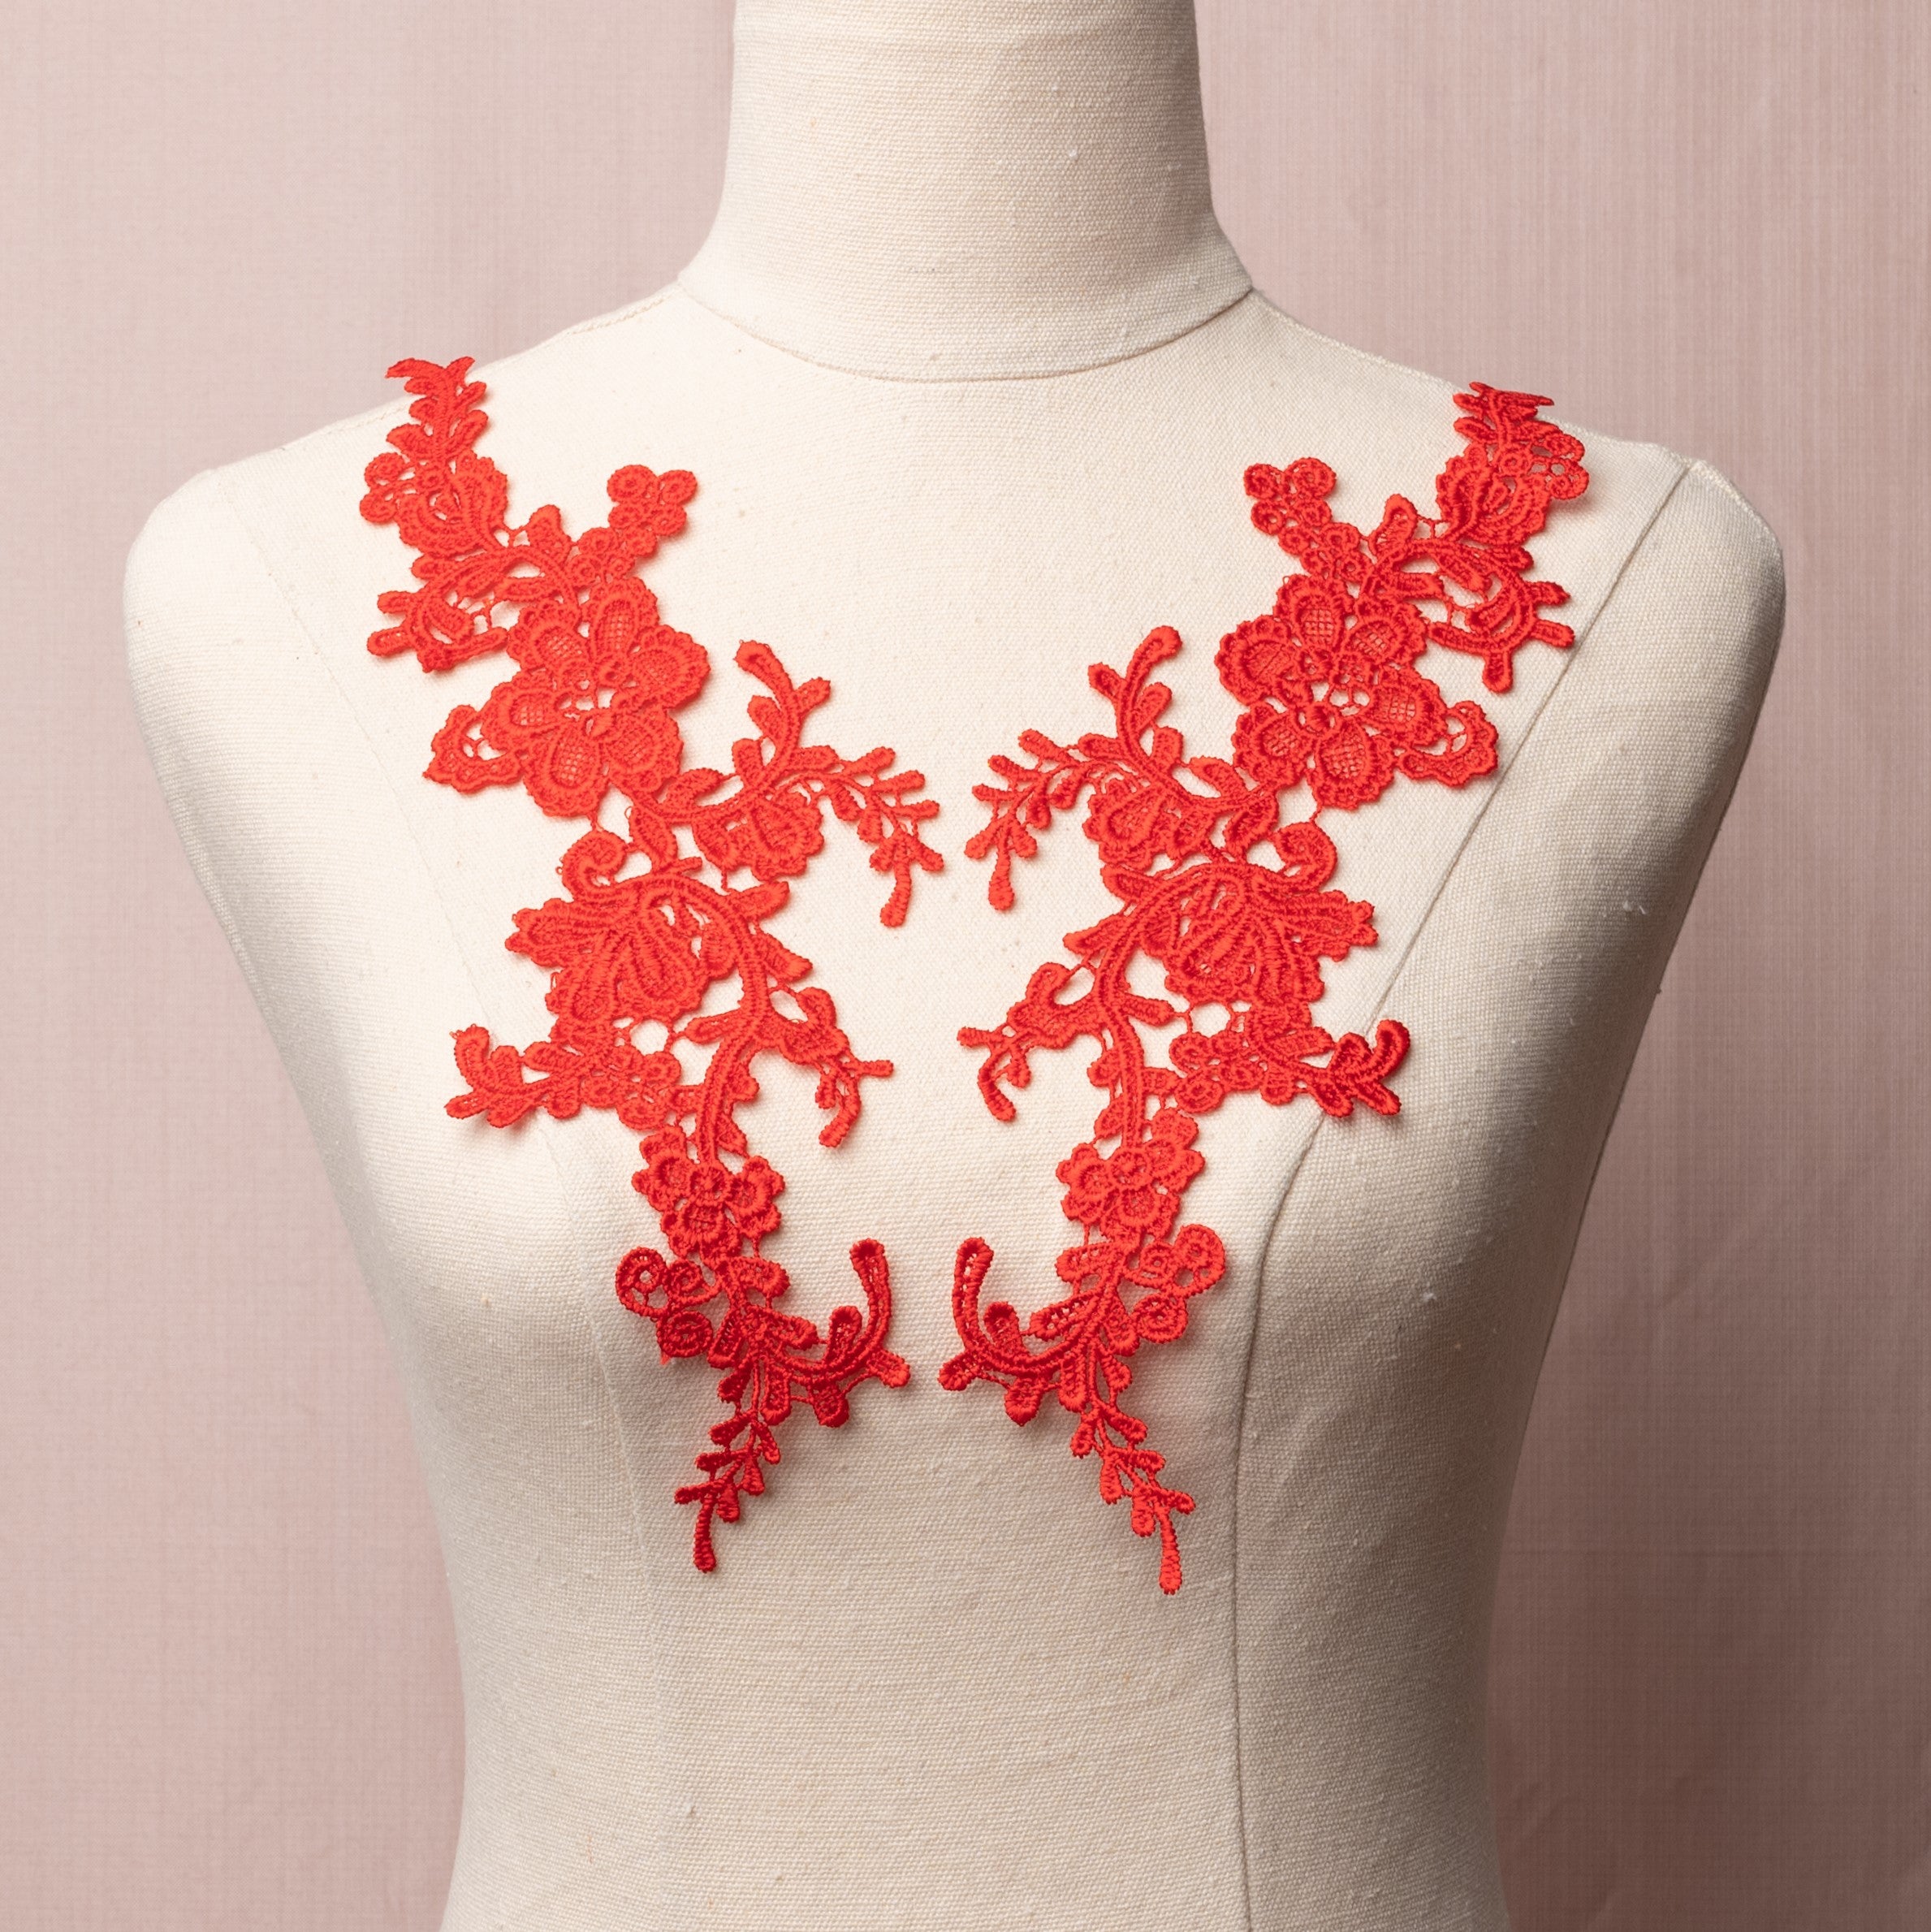 Heavily embroidered red floral applique pair displayed on a mannequin.